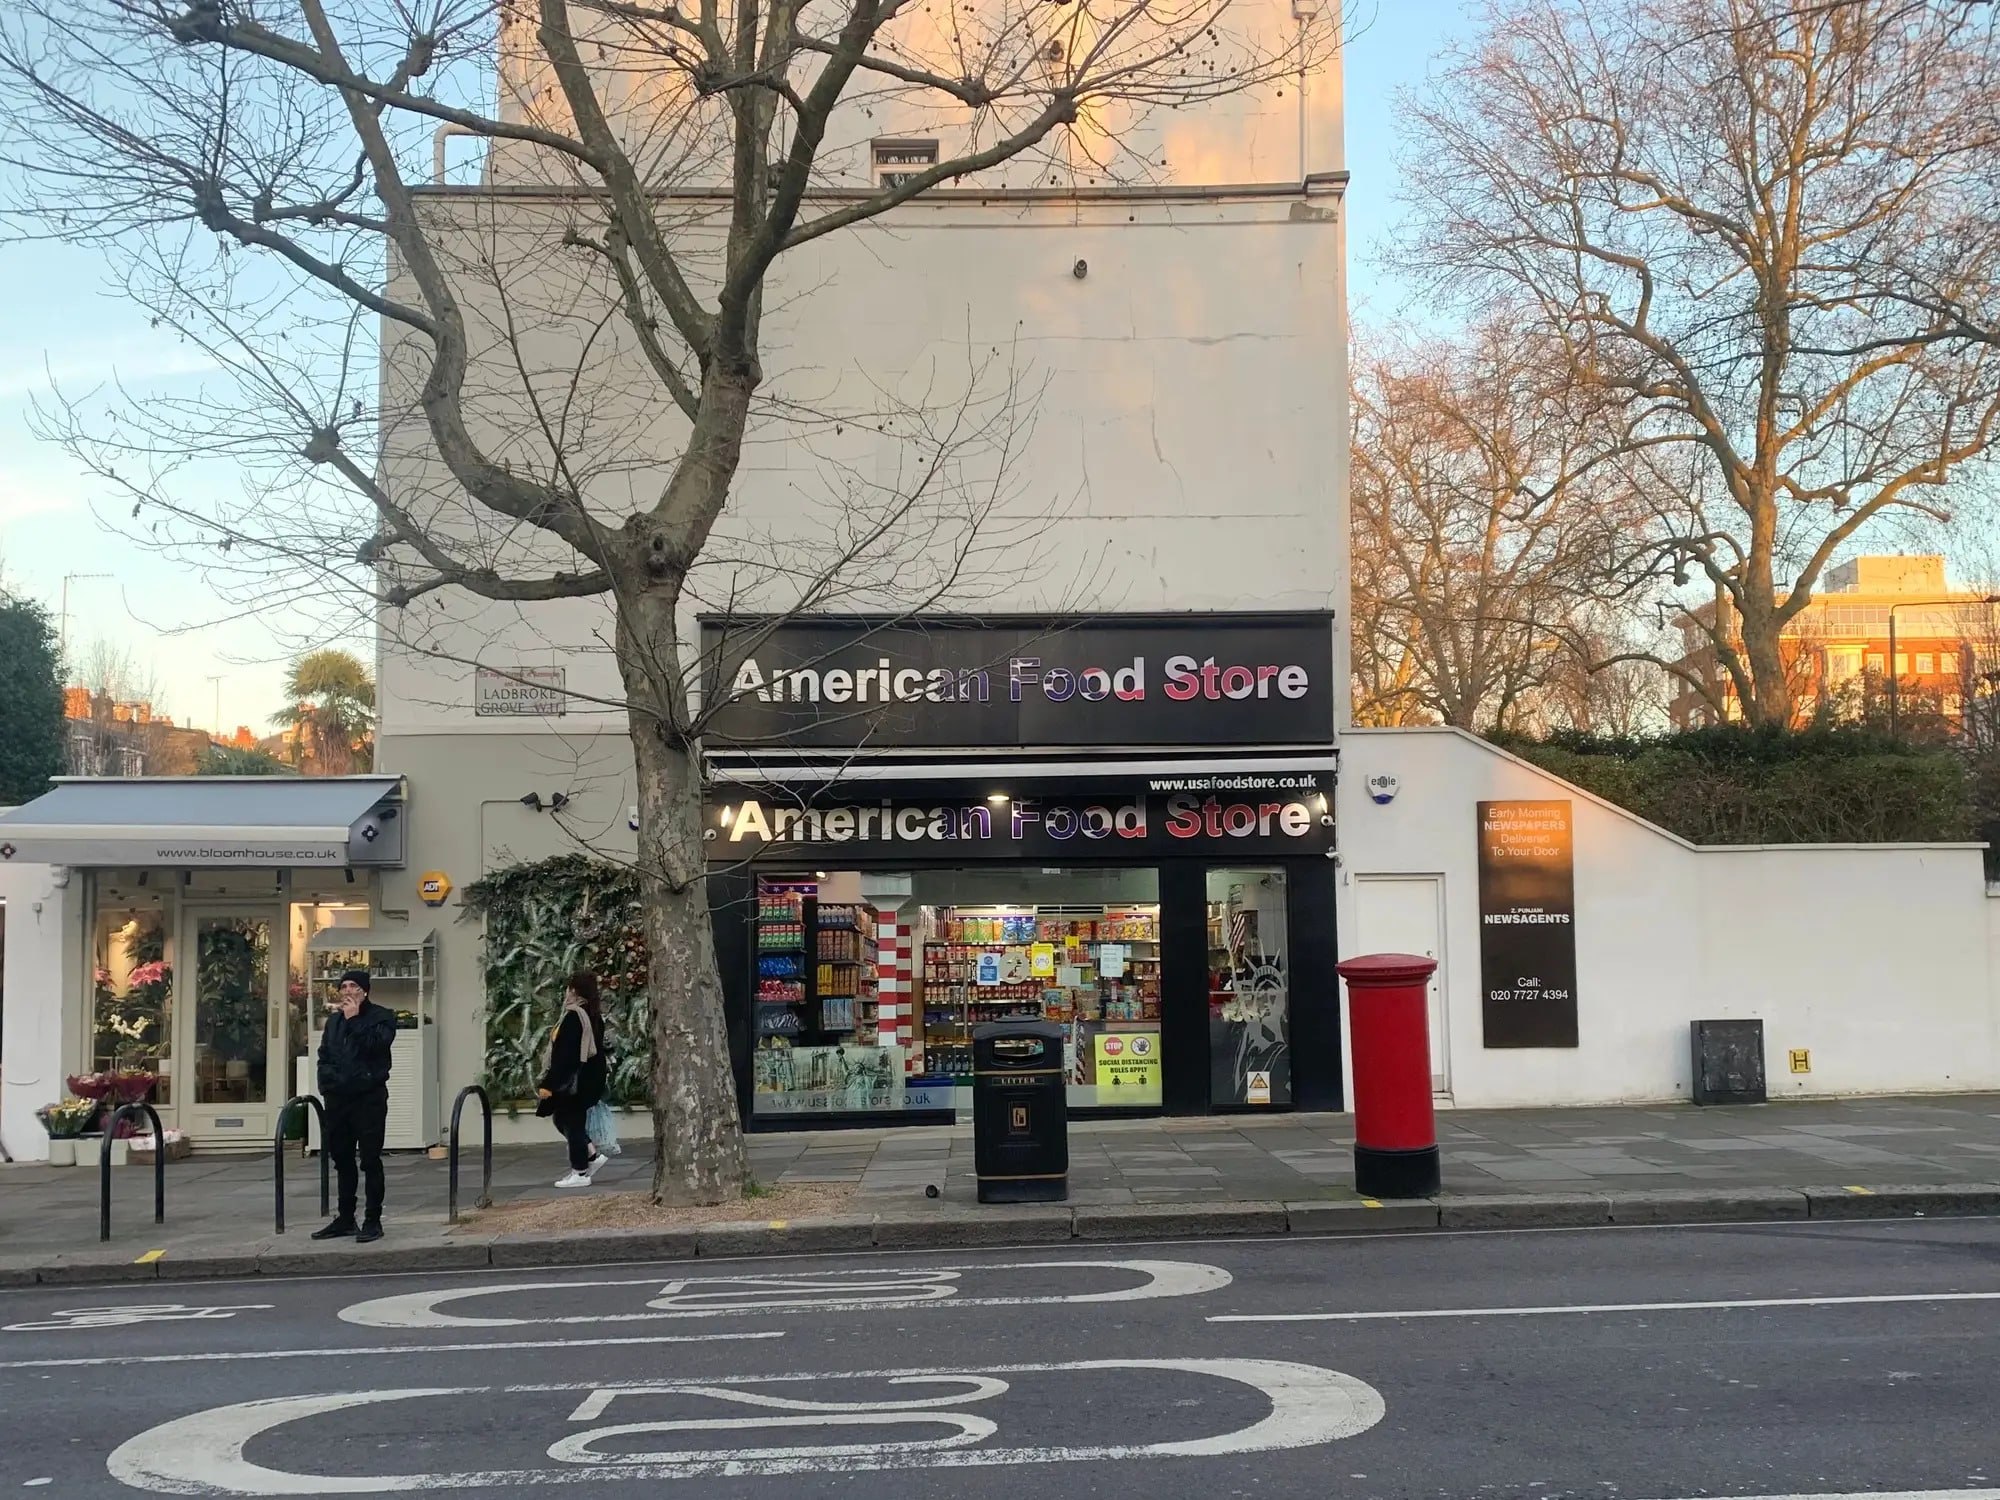 The American Food Store London